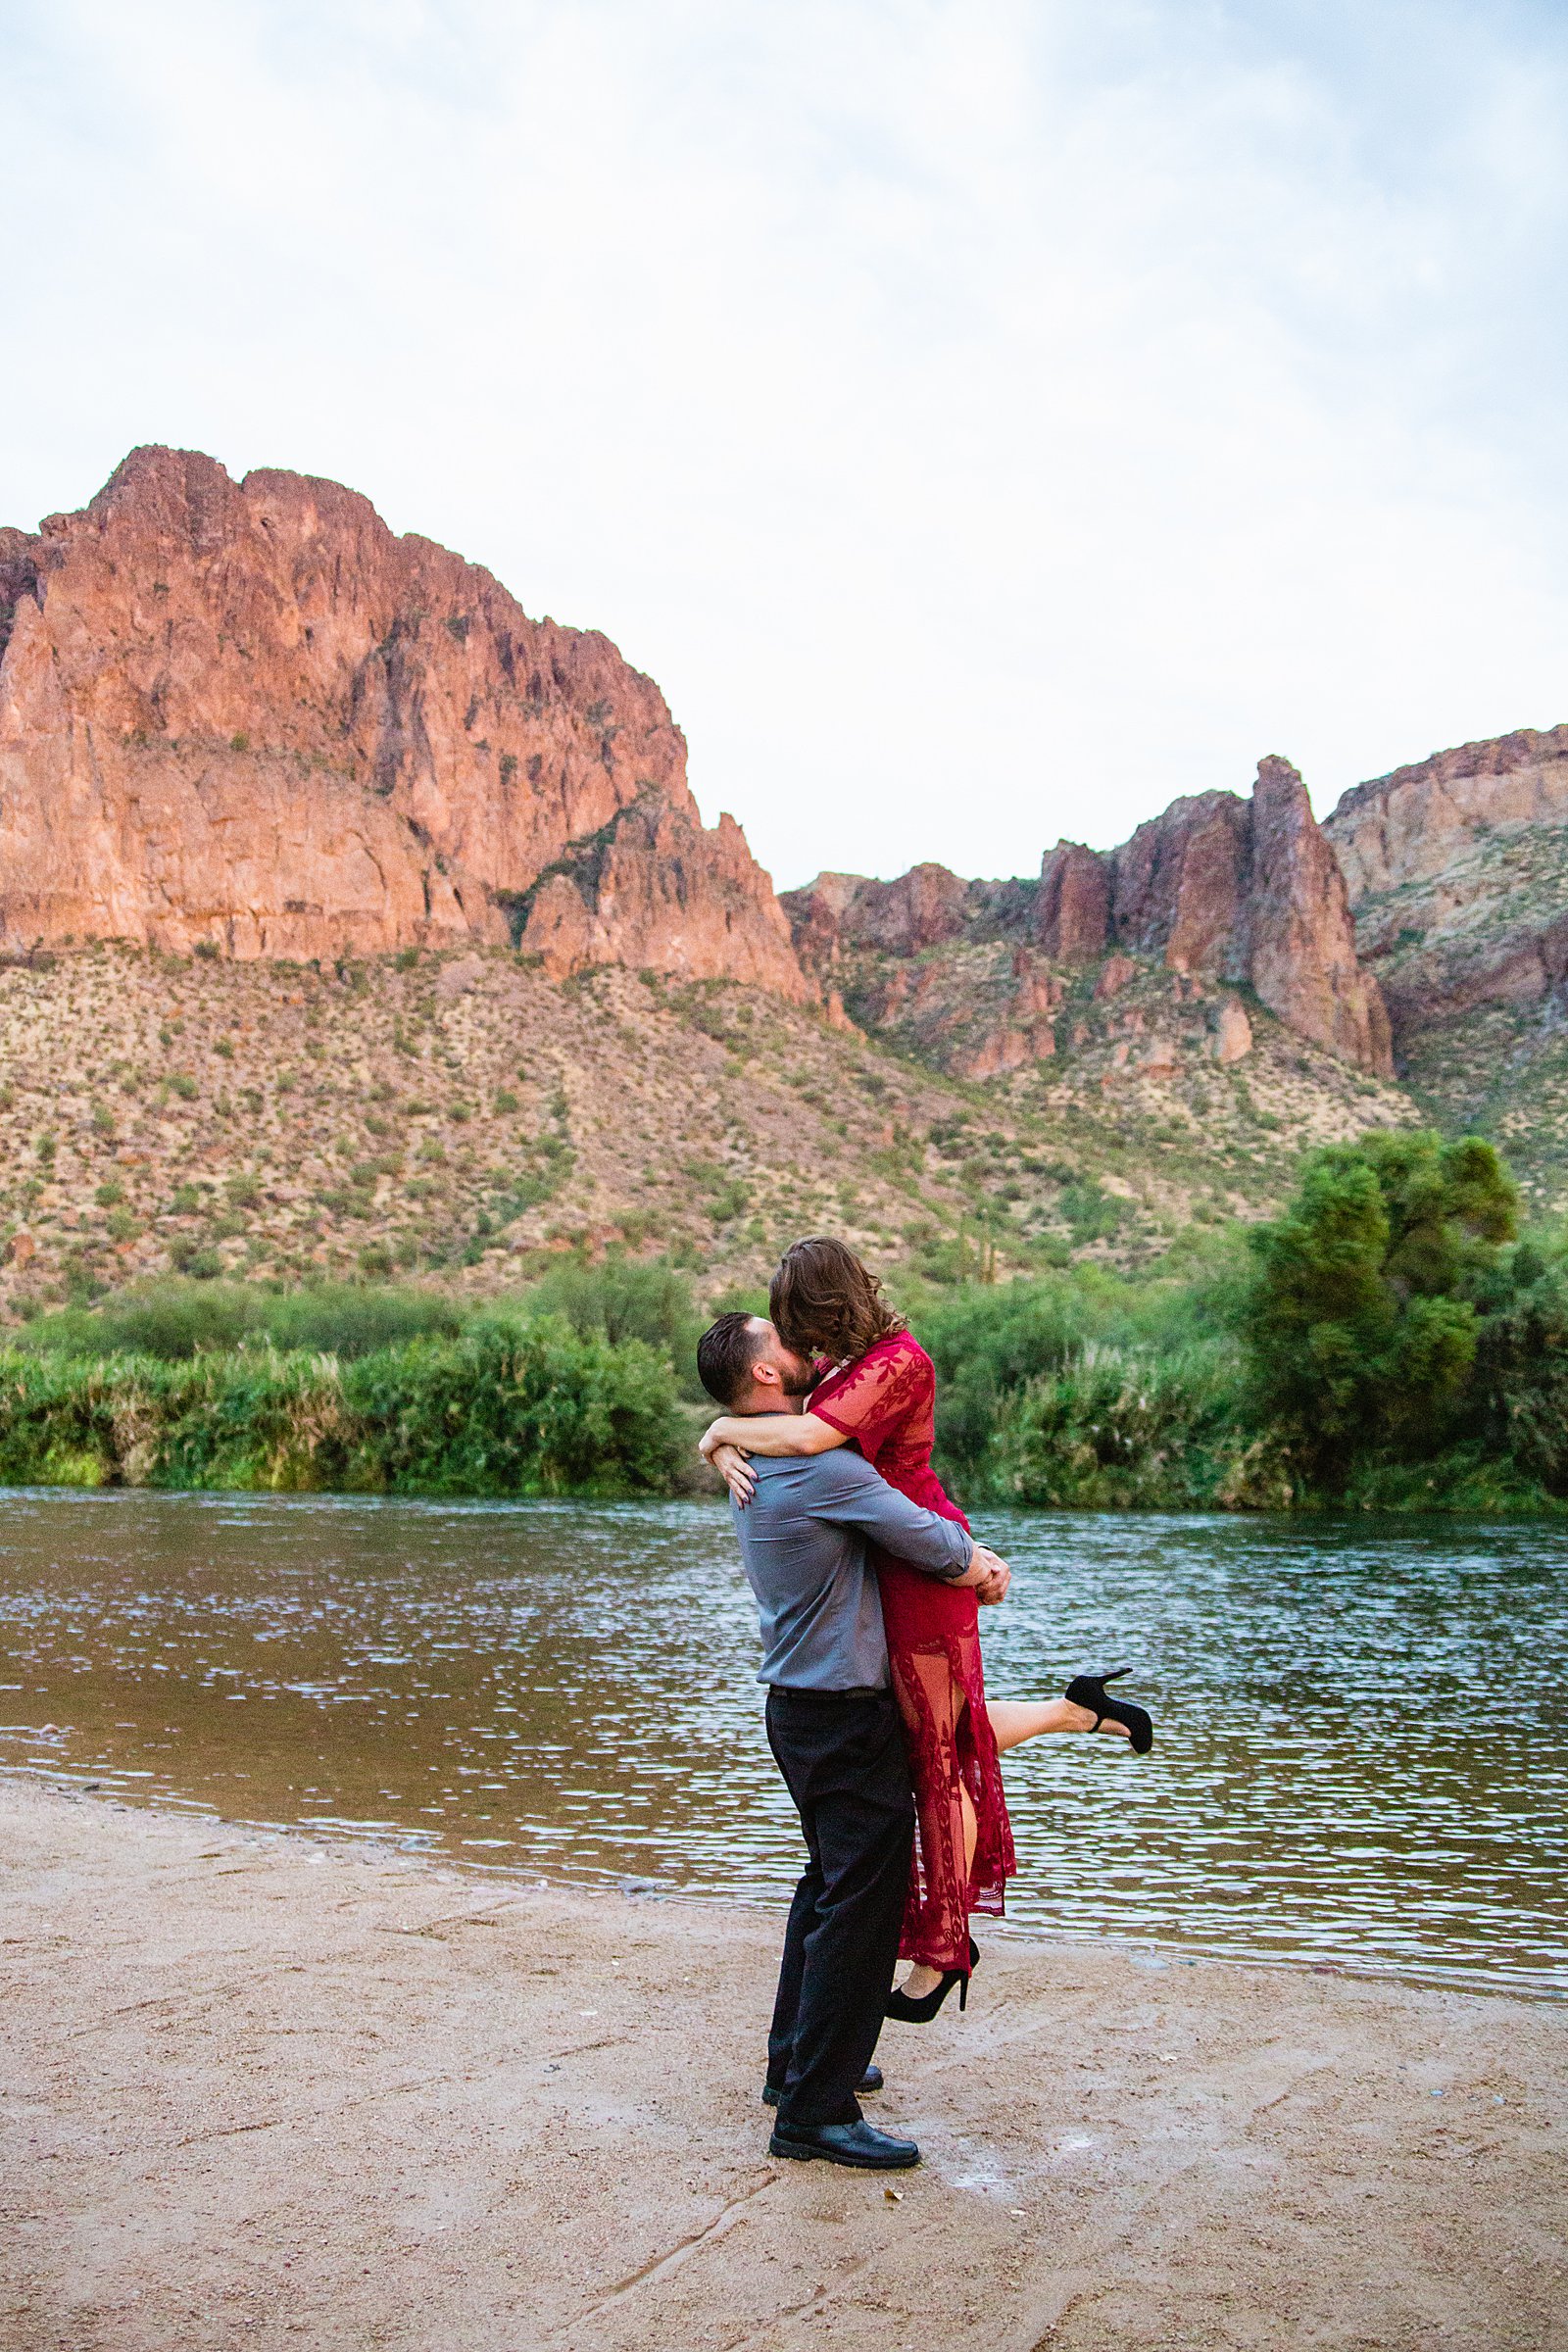 Couple share an intimate moment at their Phoenix engagement session by Arizona engagement photographer PMA Photography.